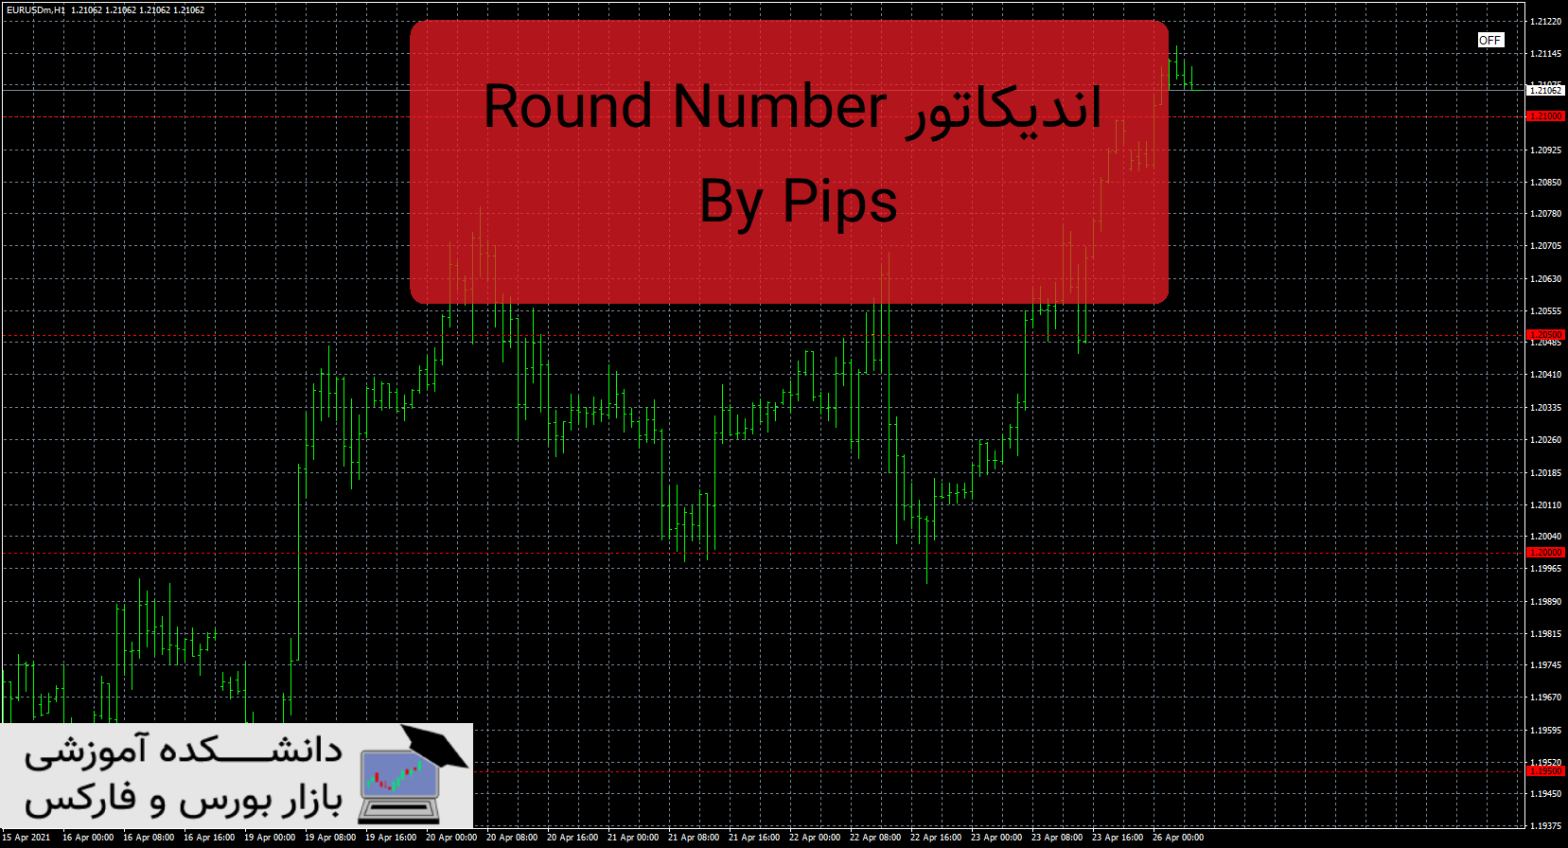 Round Number By Pips دانلود و معرفی اندیکاتور